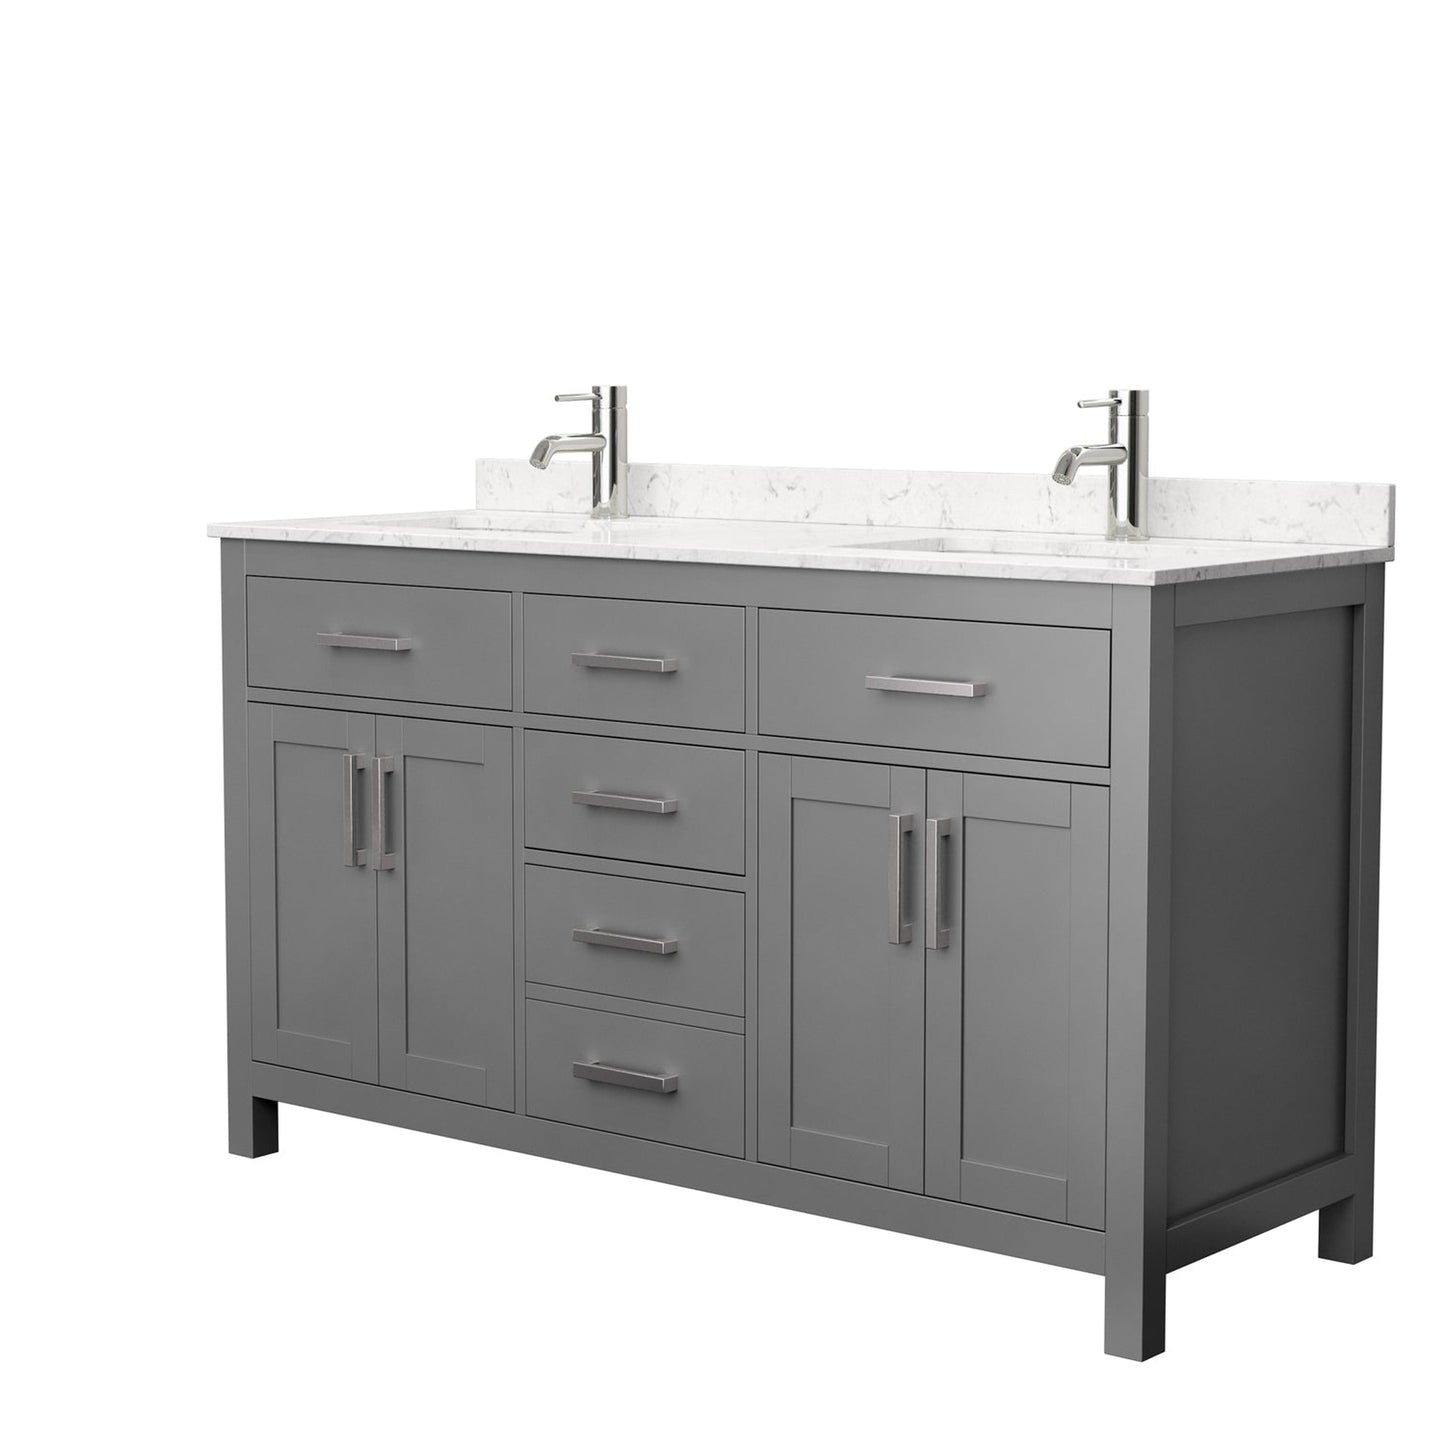 Wyndham Collection Beckett 60" Double Bathroom Dark Gray Vanity With White Carrara Cultured Marble Countertop, Undermount Square Sink And Brushed Nickel Trim